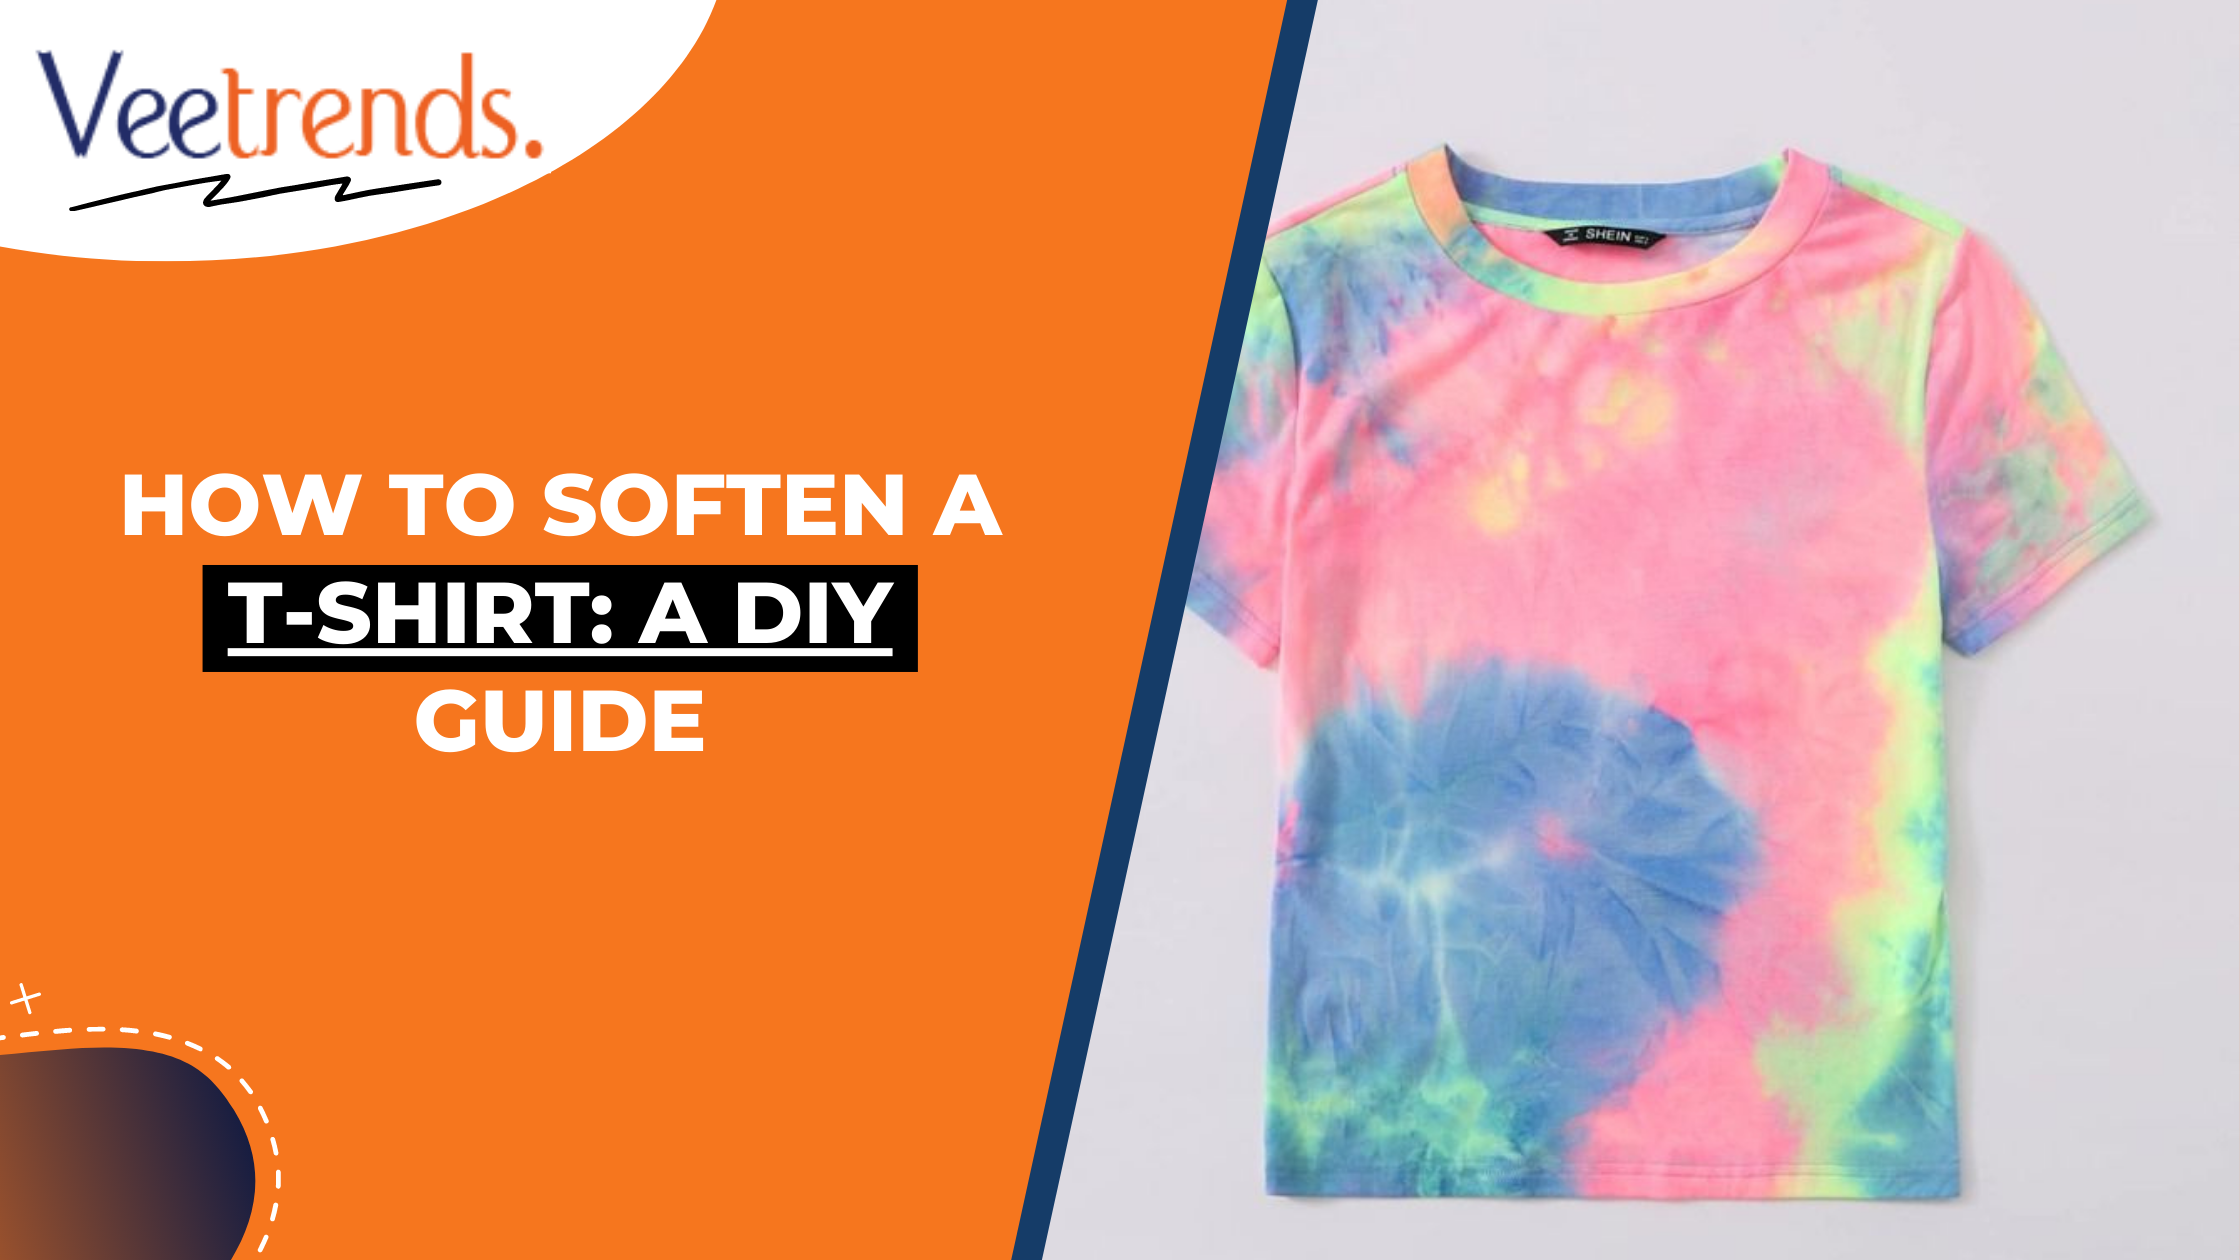 How To Dry Clothes Fast: The Student Friendly Guide 